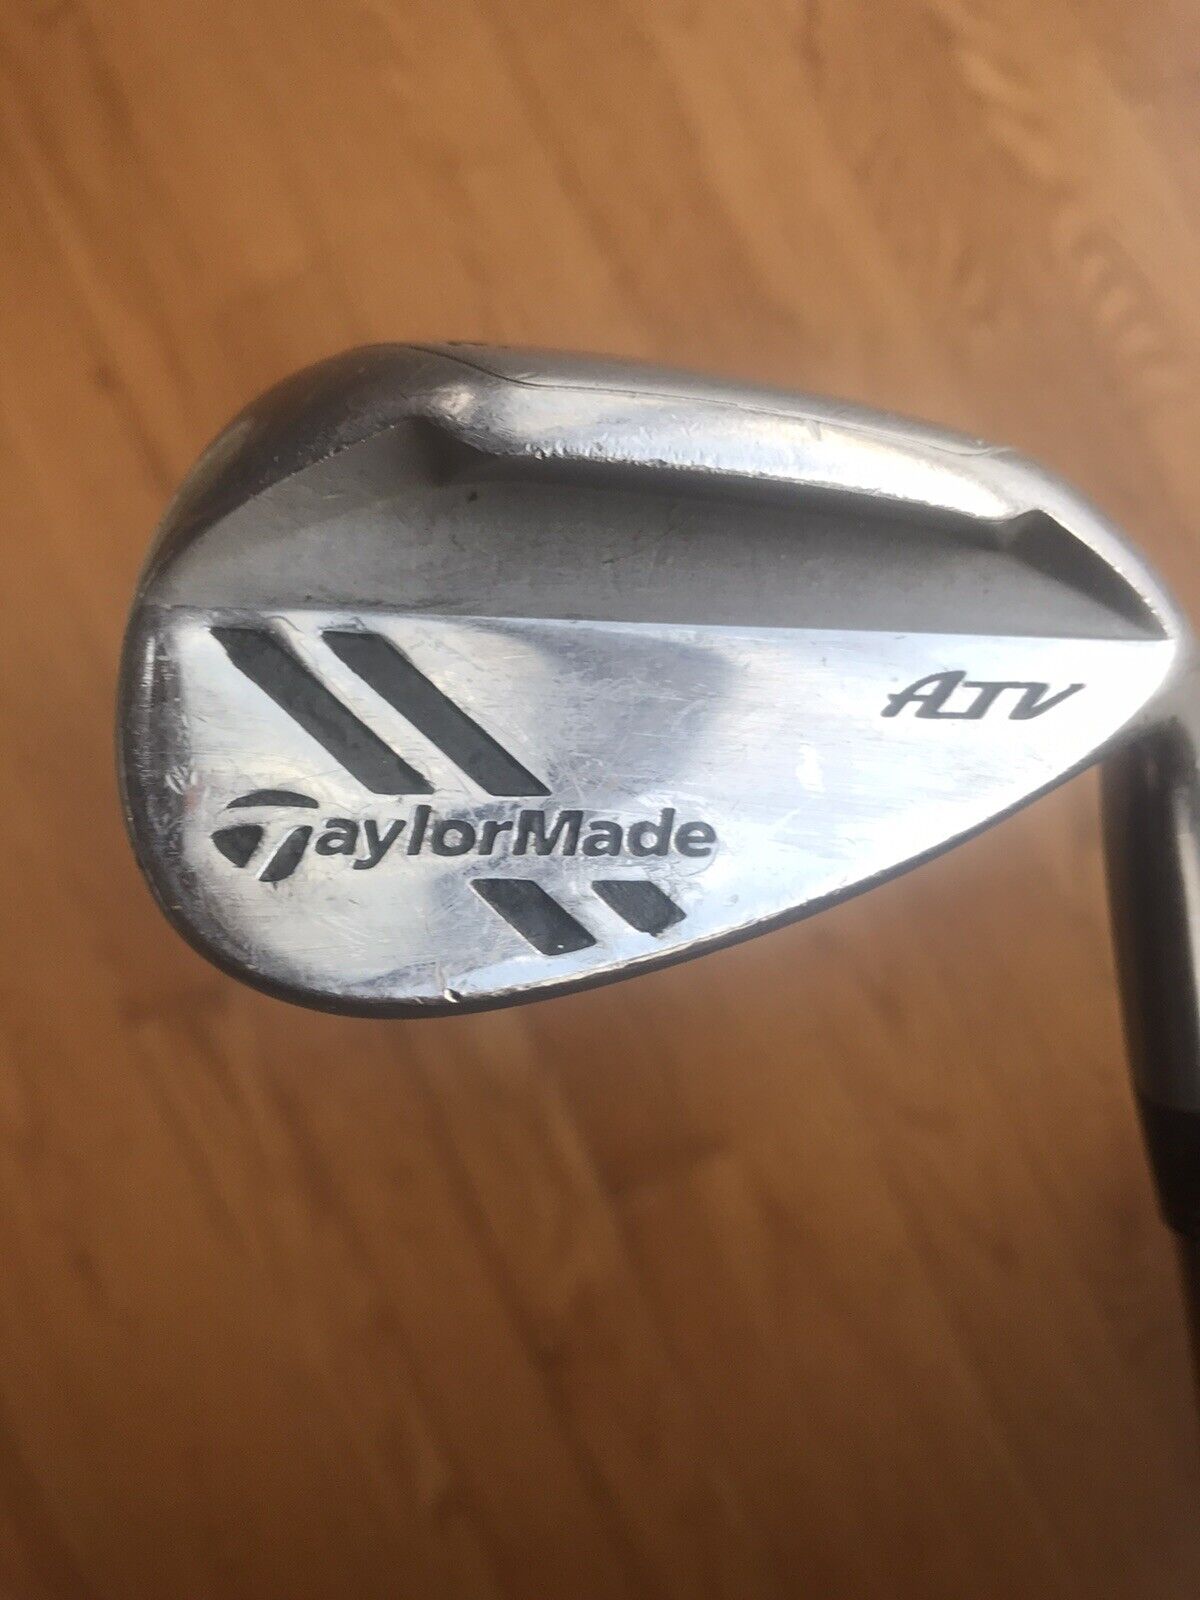 Taylormade 54* ATV Wedge, Right Handed. Super Easy Out of Sand or Rough